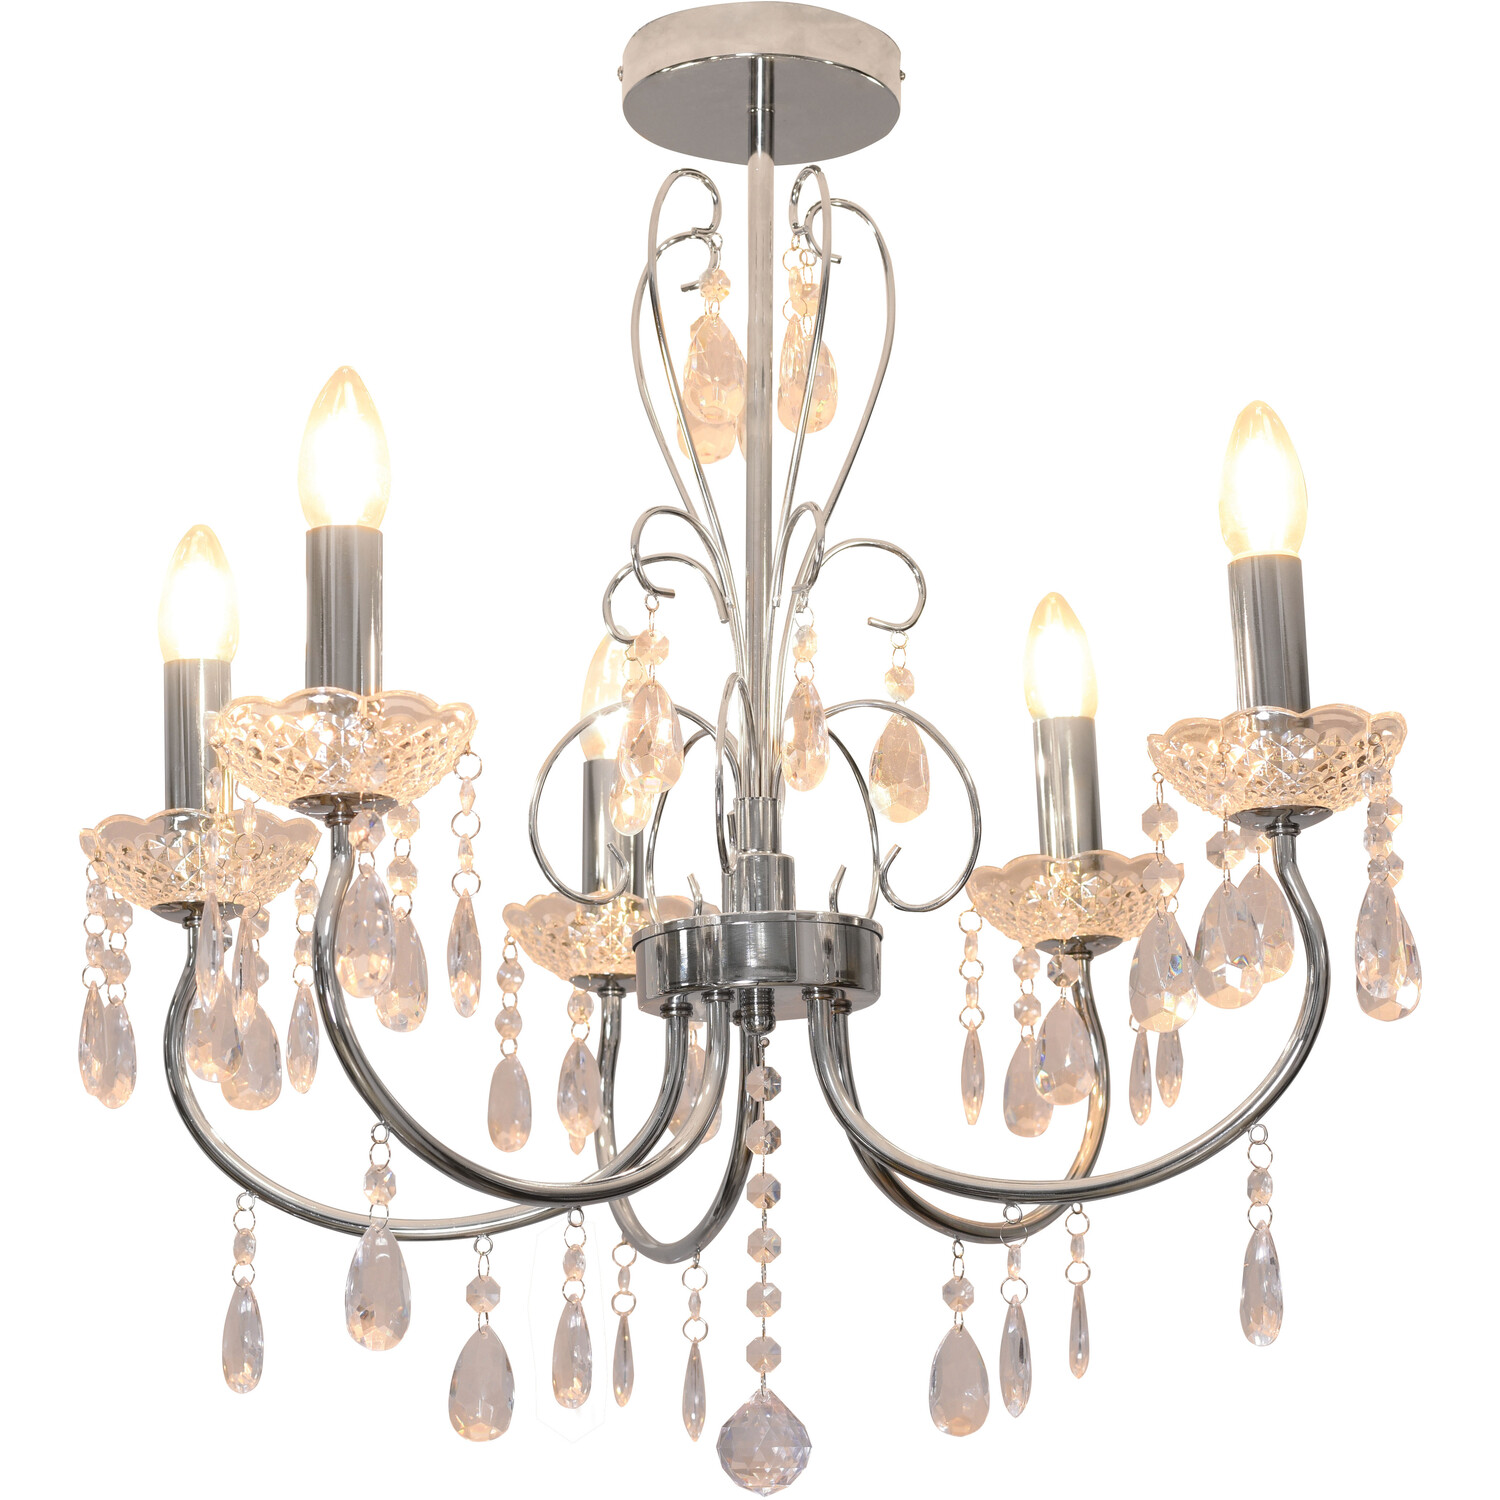 Victoria 5 Light Chrome and Crystal Chandelier Image 2